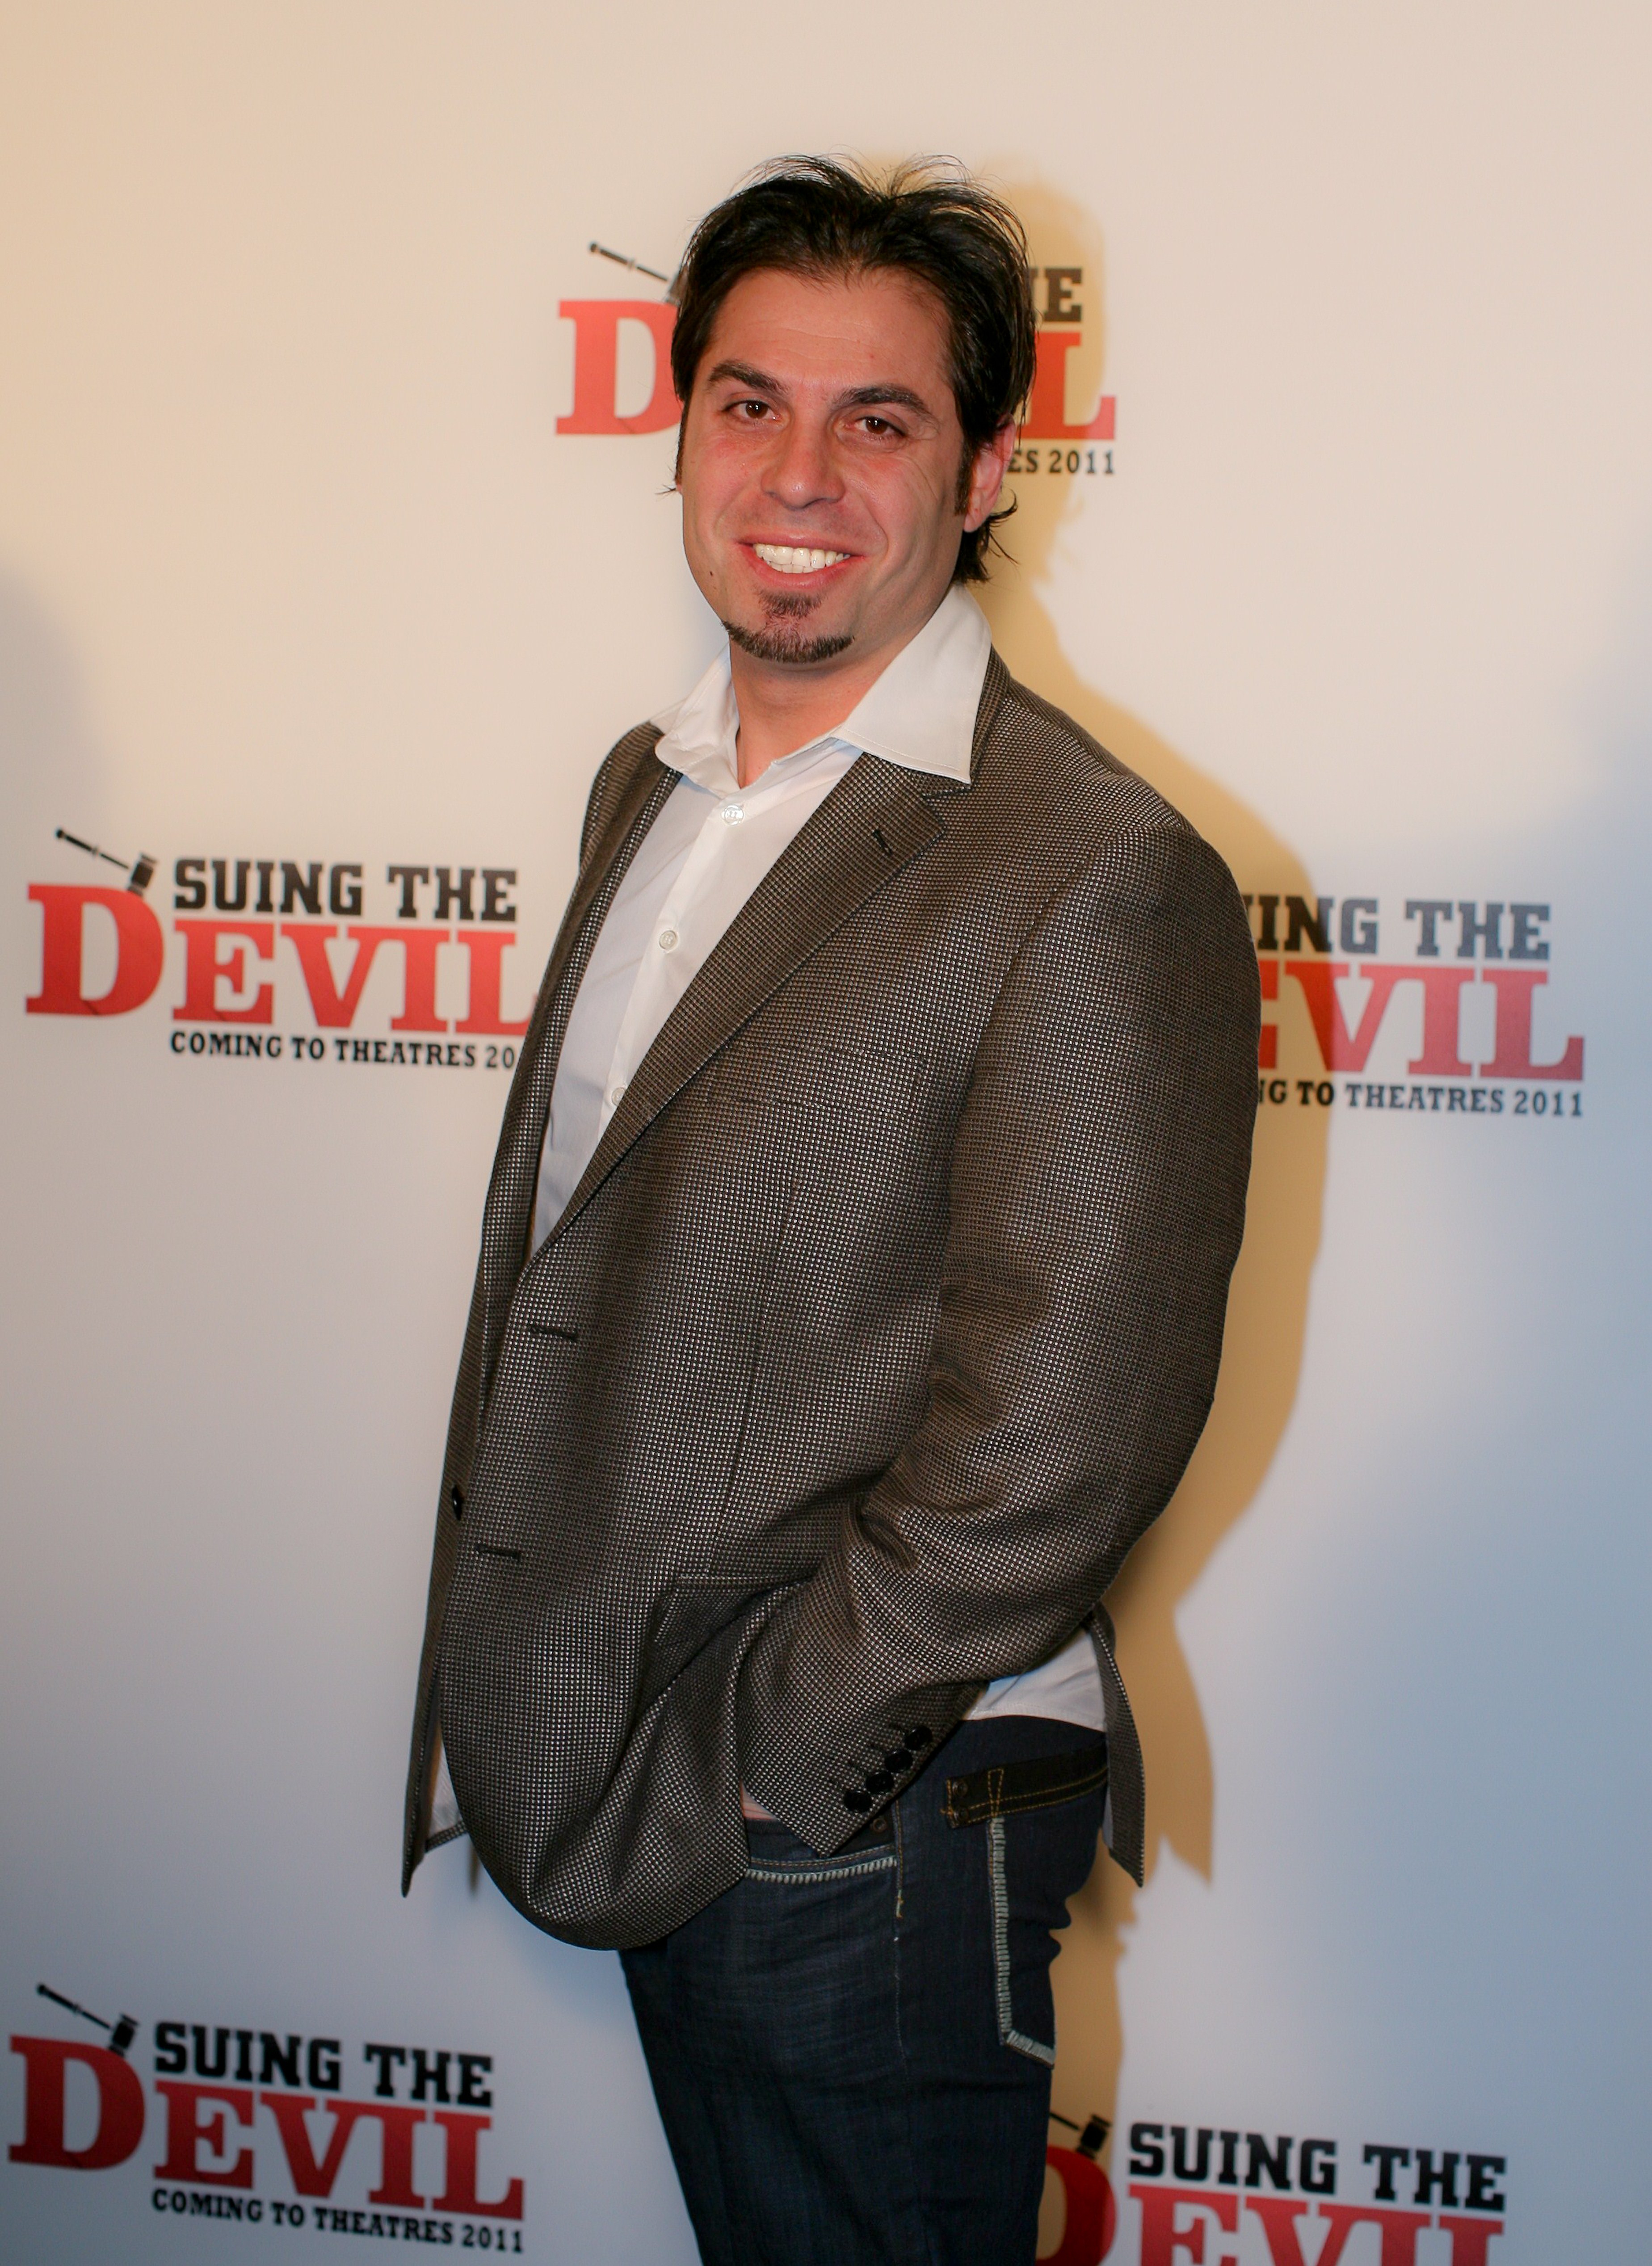 Bobey Taleb at the Red Carpet Premiere of Suing the Devil at Fox Studio's Hoyts Entertainment Quarter on 4th August 2010.